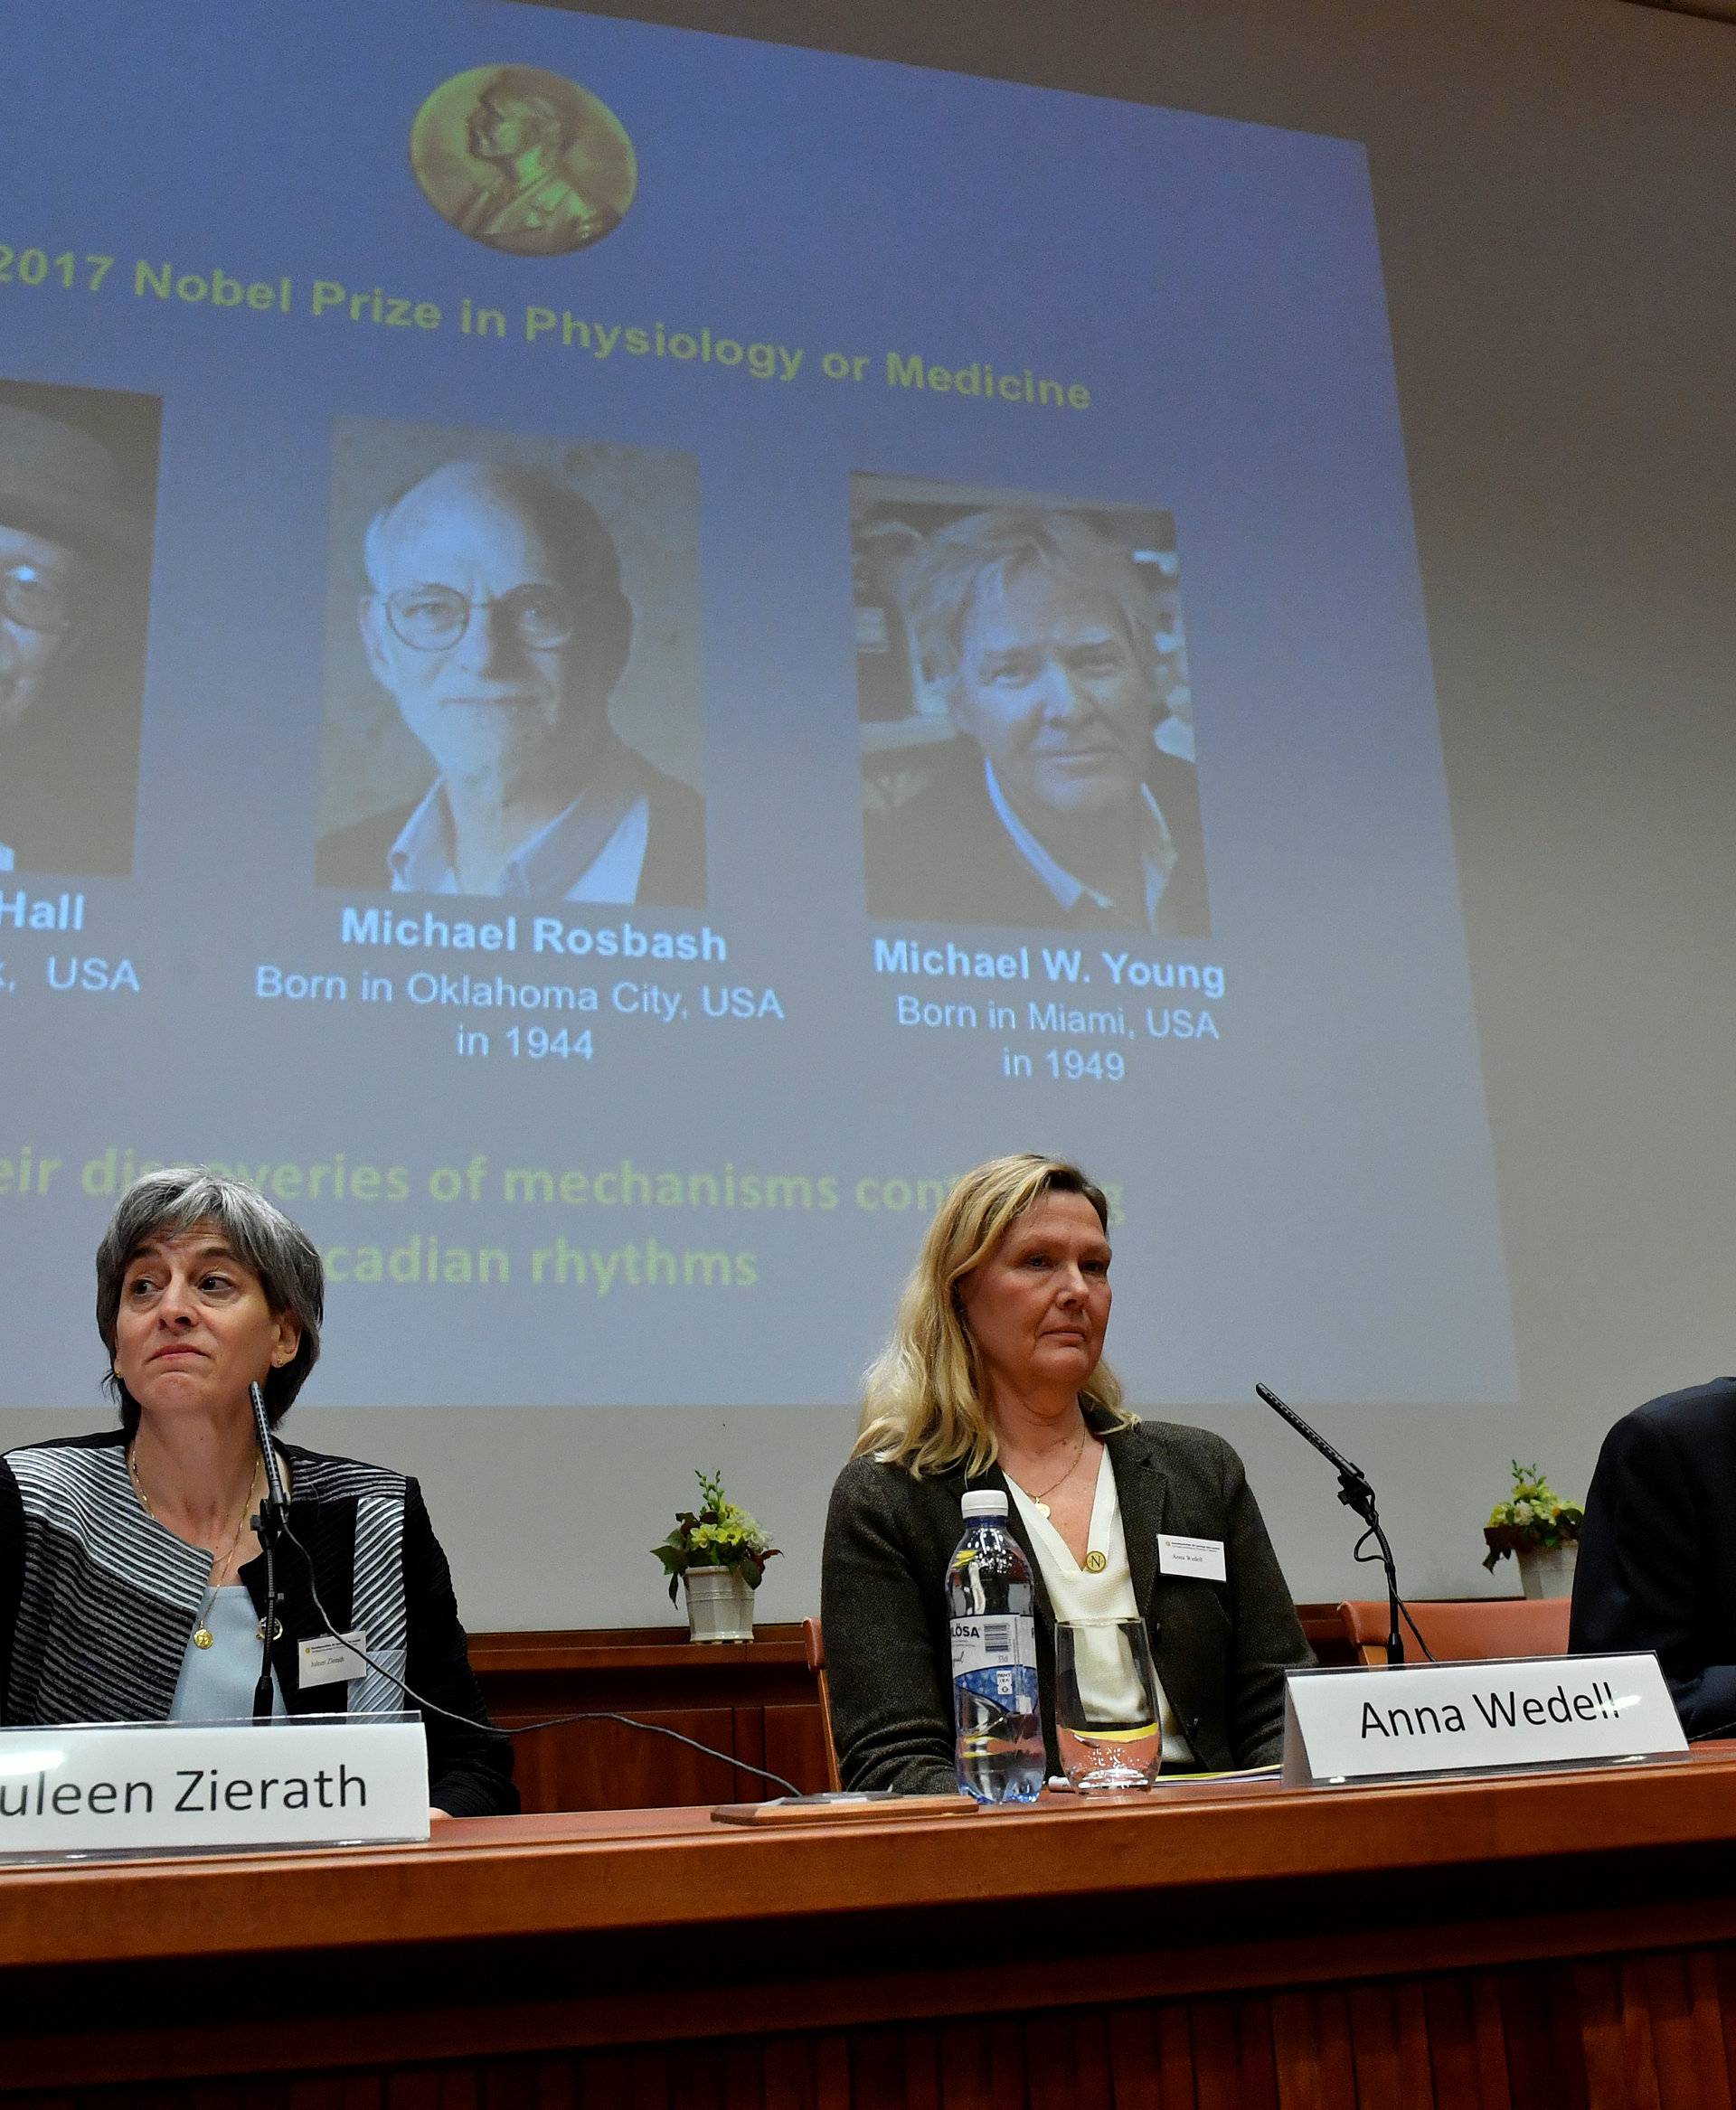 Juleen Zierath, Professor of Physiology, Anna Wedell, chairman Nobel Committee for Physiology or Medicine 2017, are seen during the announcement of the winners of the Nobel Prize in Physiology or Medicine 2017, in Stockholm